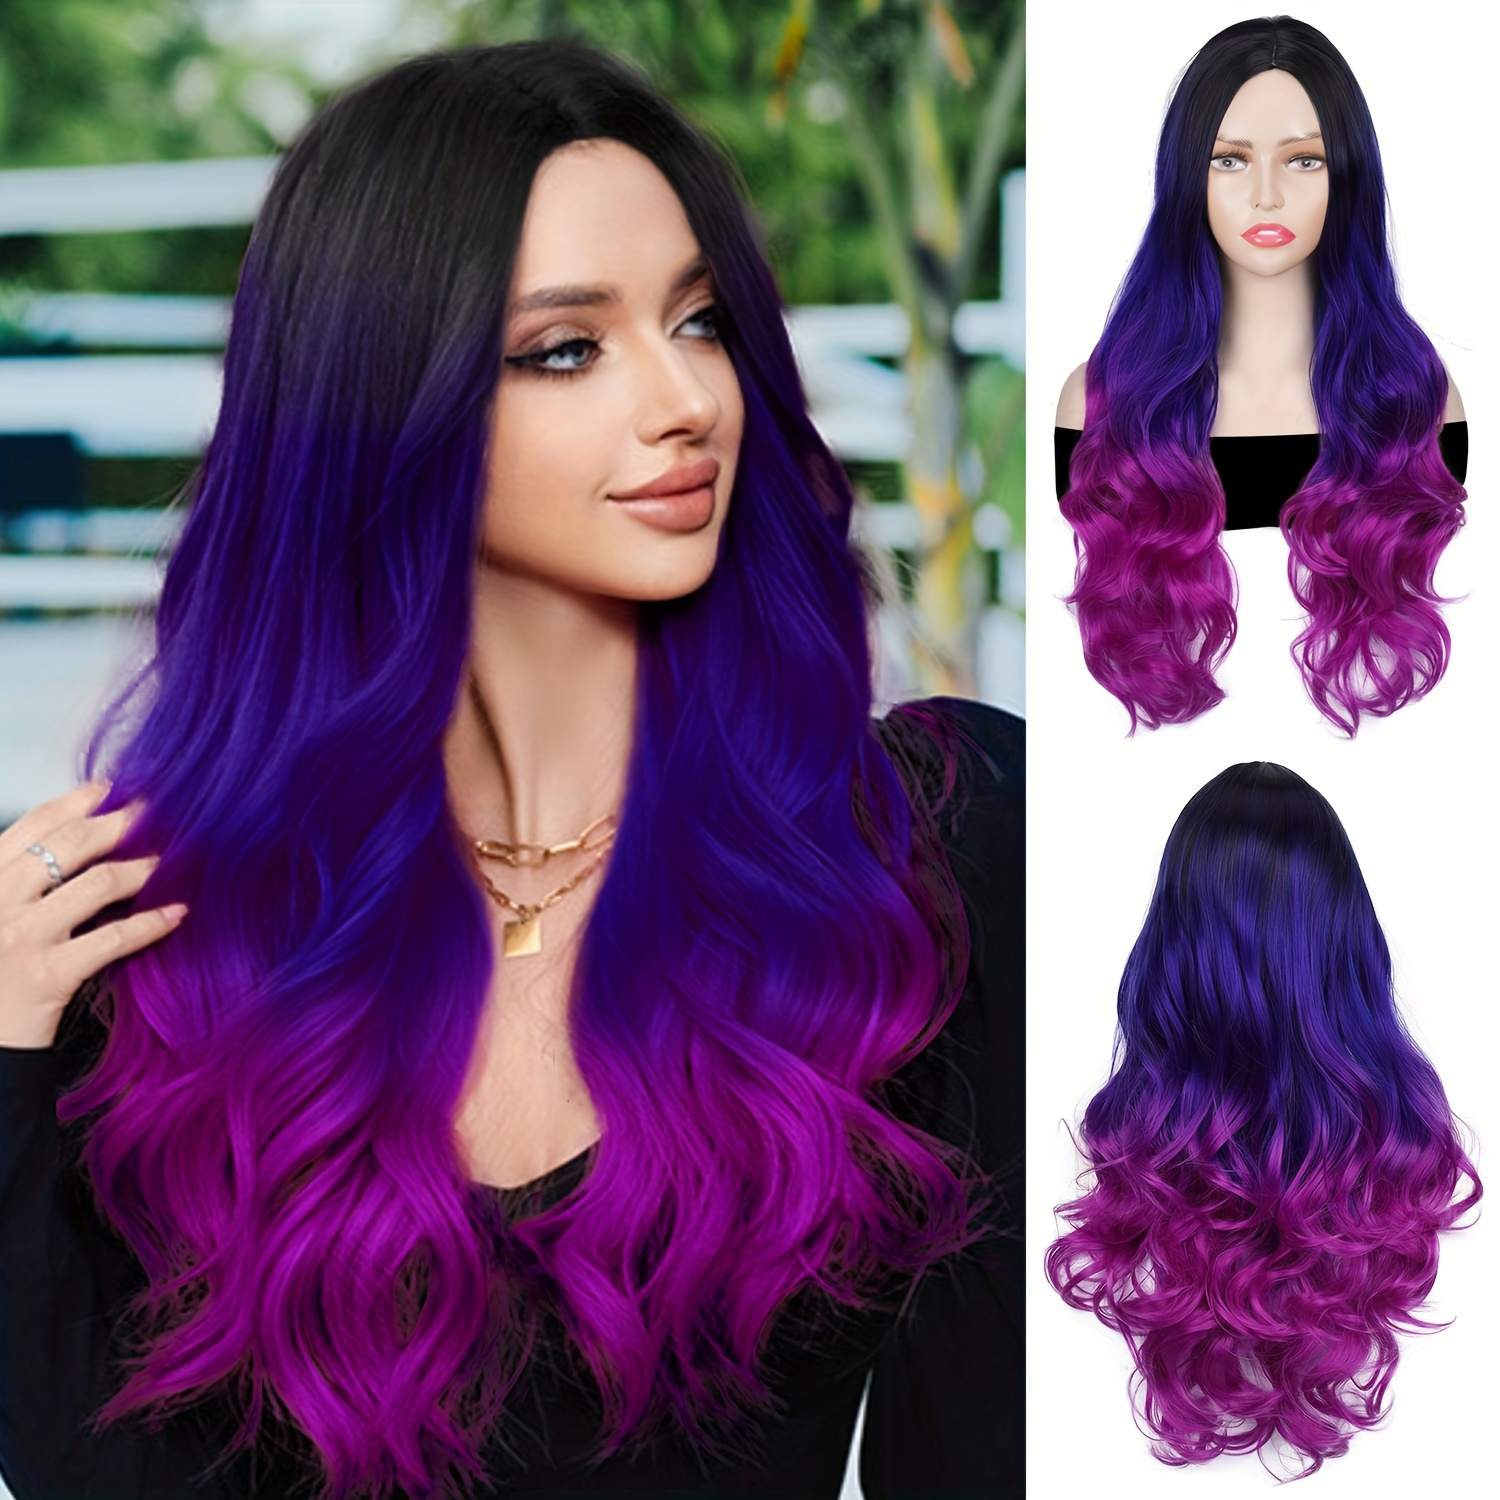 

3 Tone Ombre Color Long Purple Wig Black To Blue To Purple Hair Heat Resistant Dark Root Synthetic Hair Wavy Wig Long Purple Wig Wavy Colored Wigs For Women (1b/blue/purple) Music Festival